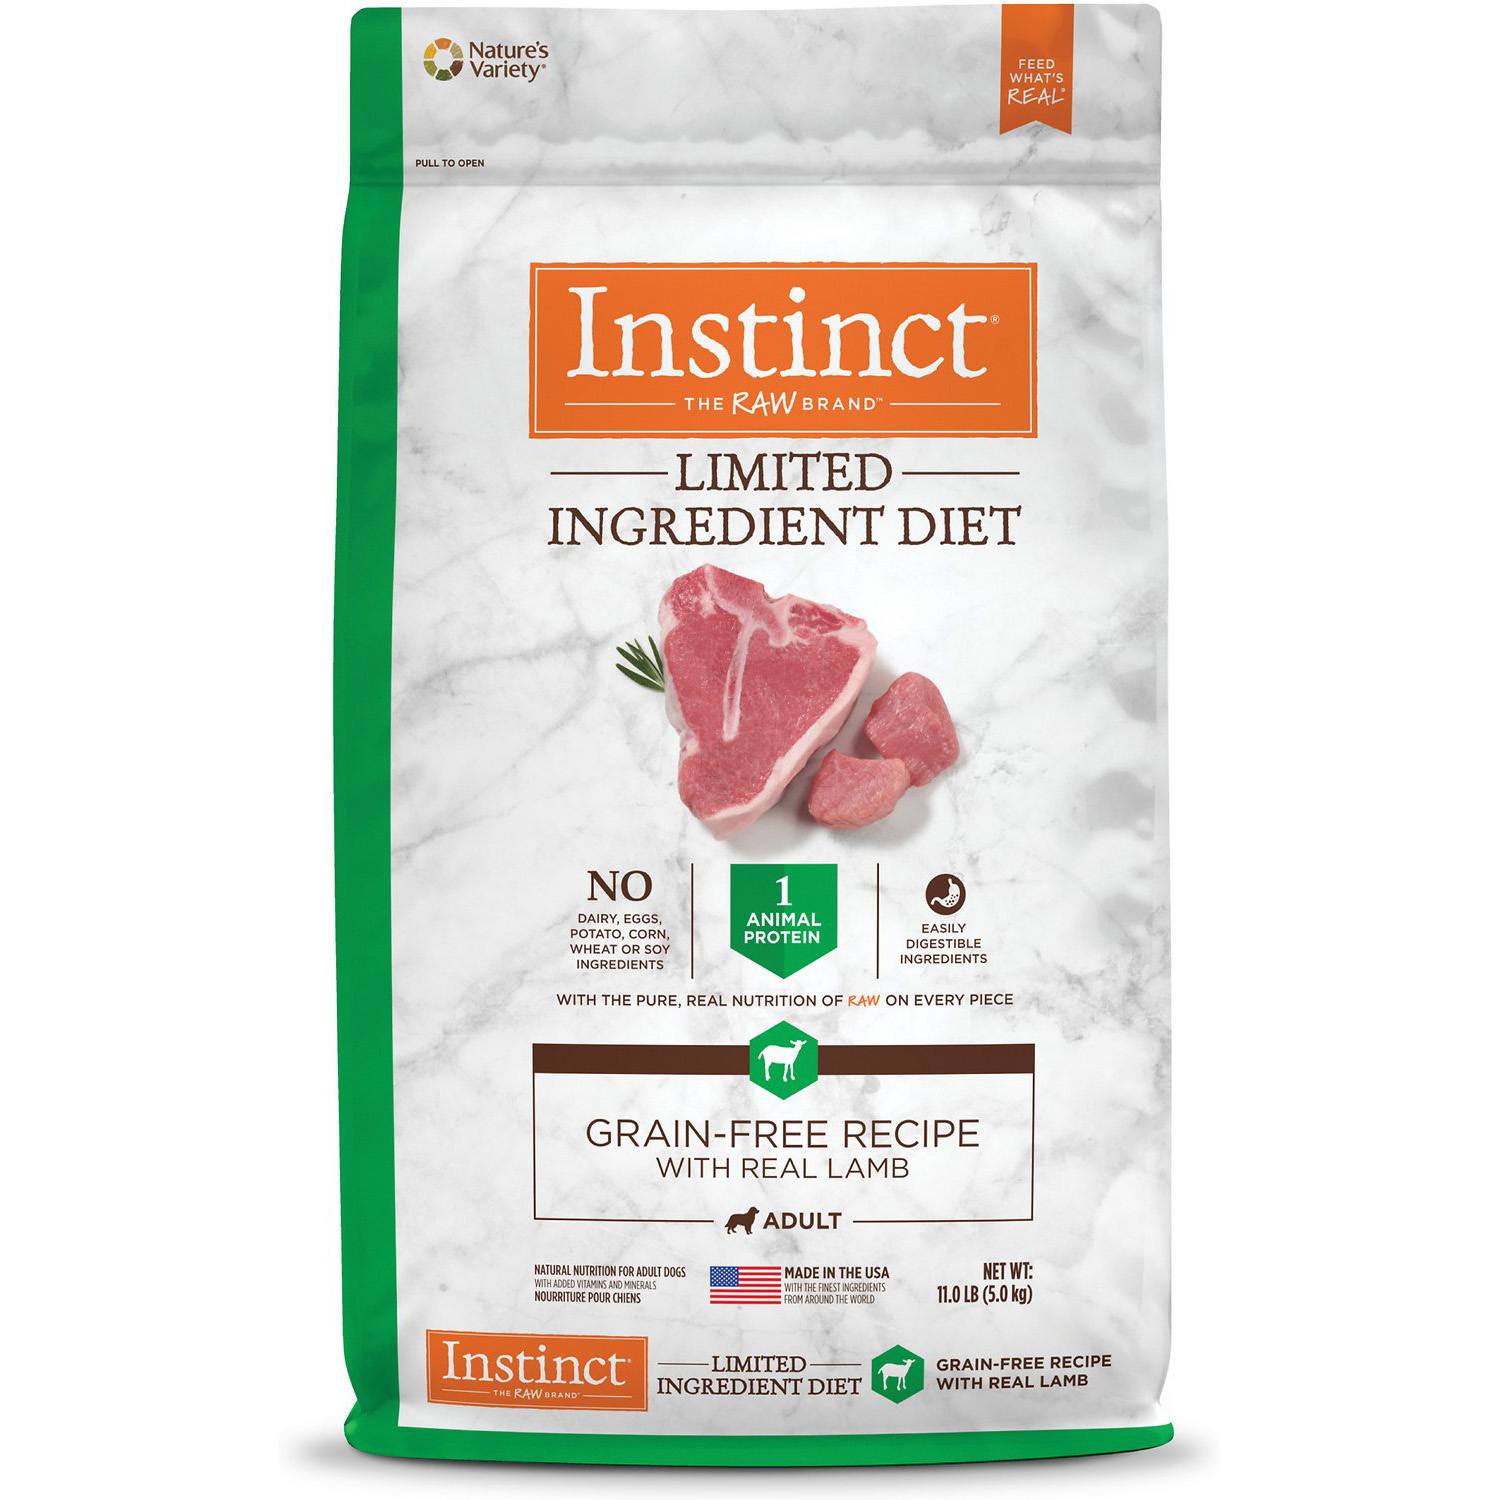 Instinct Limited Ingredient Diet Grain-Free Recipe with Real Lamb Freeze-Dried Raw Coated Dry Dog Food